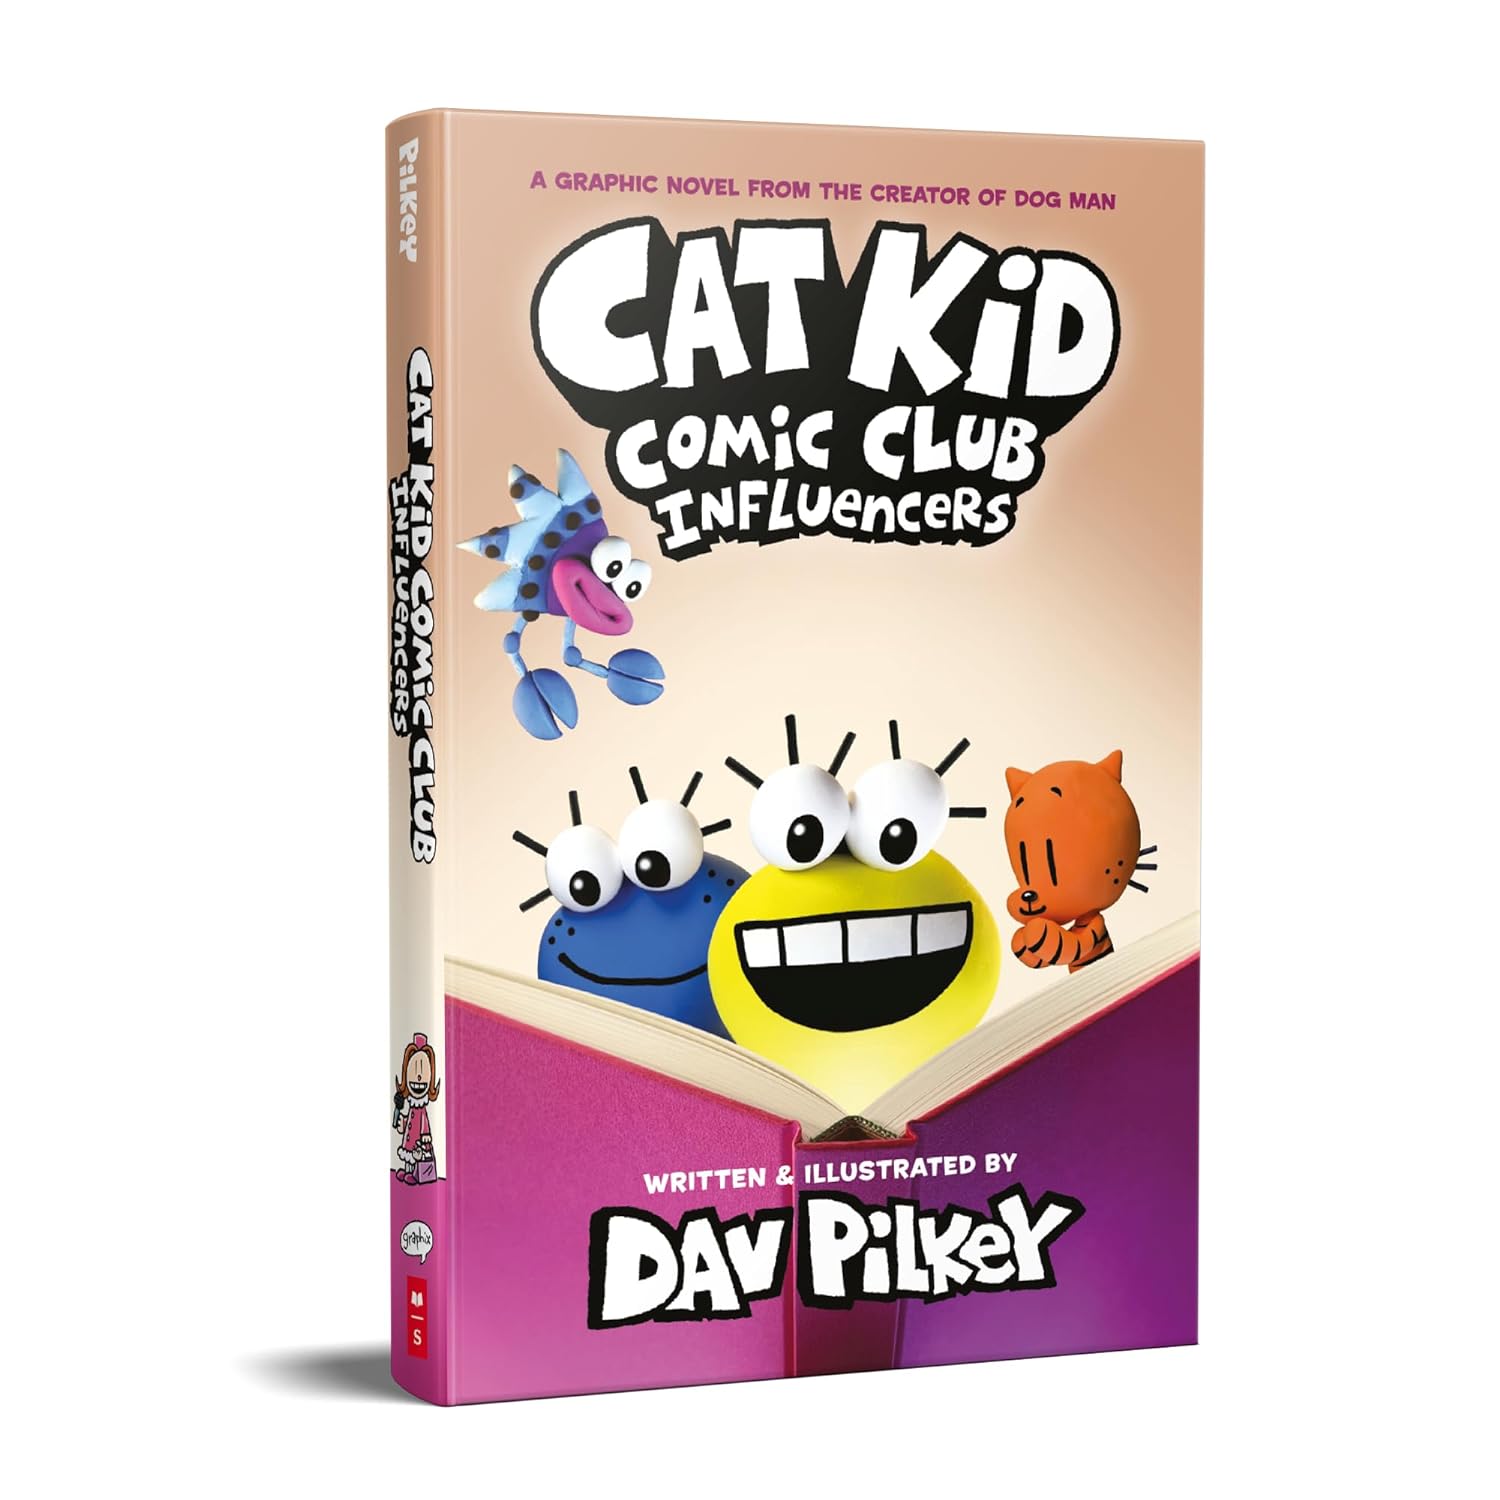 Cat Kid Comic Club #5: From the Creator of Dog Ma  by Dav Pilkey (Author)